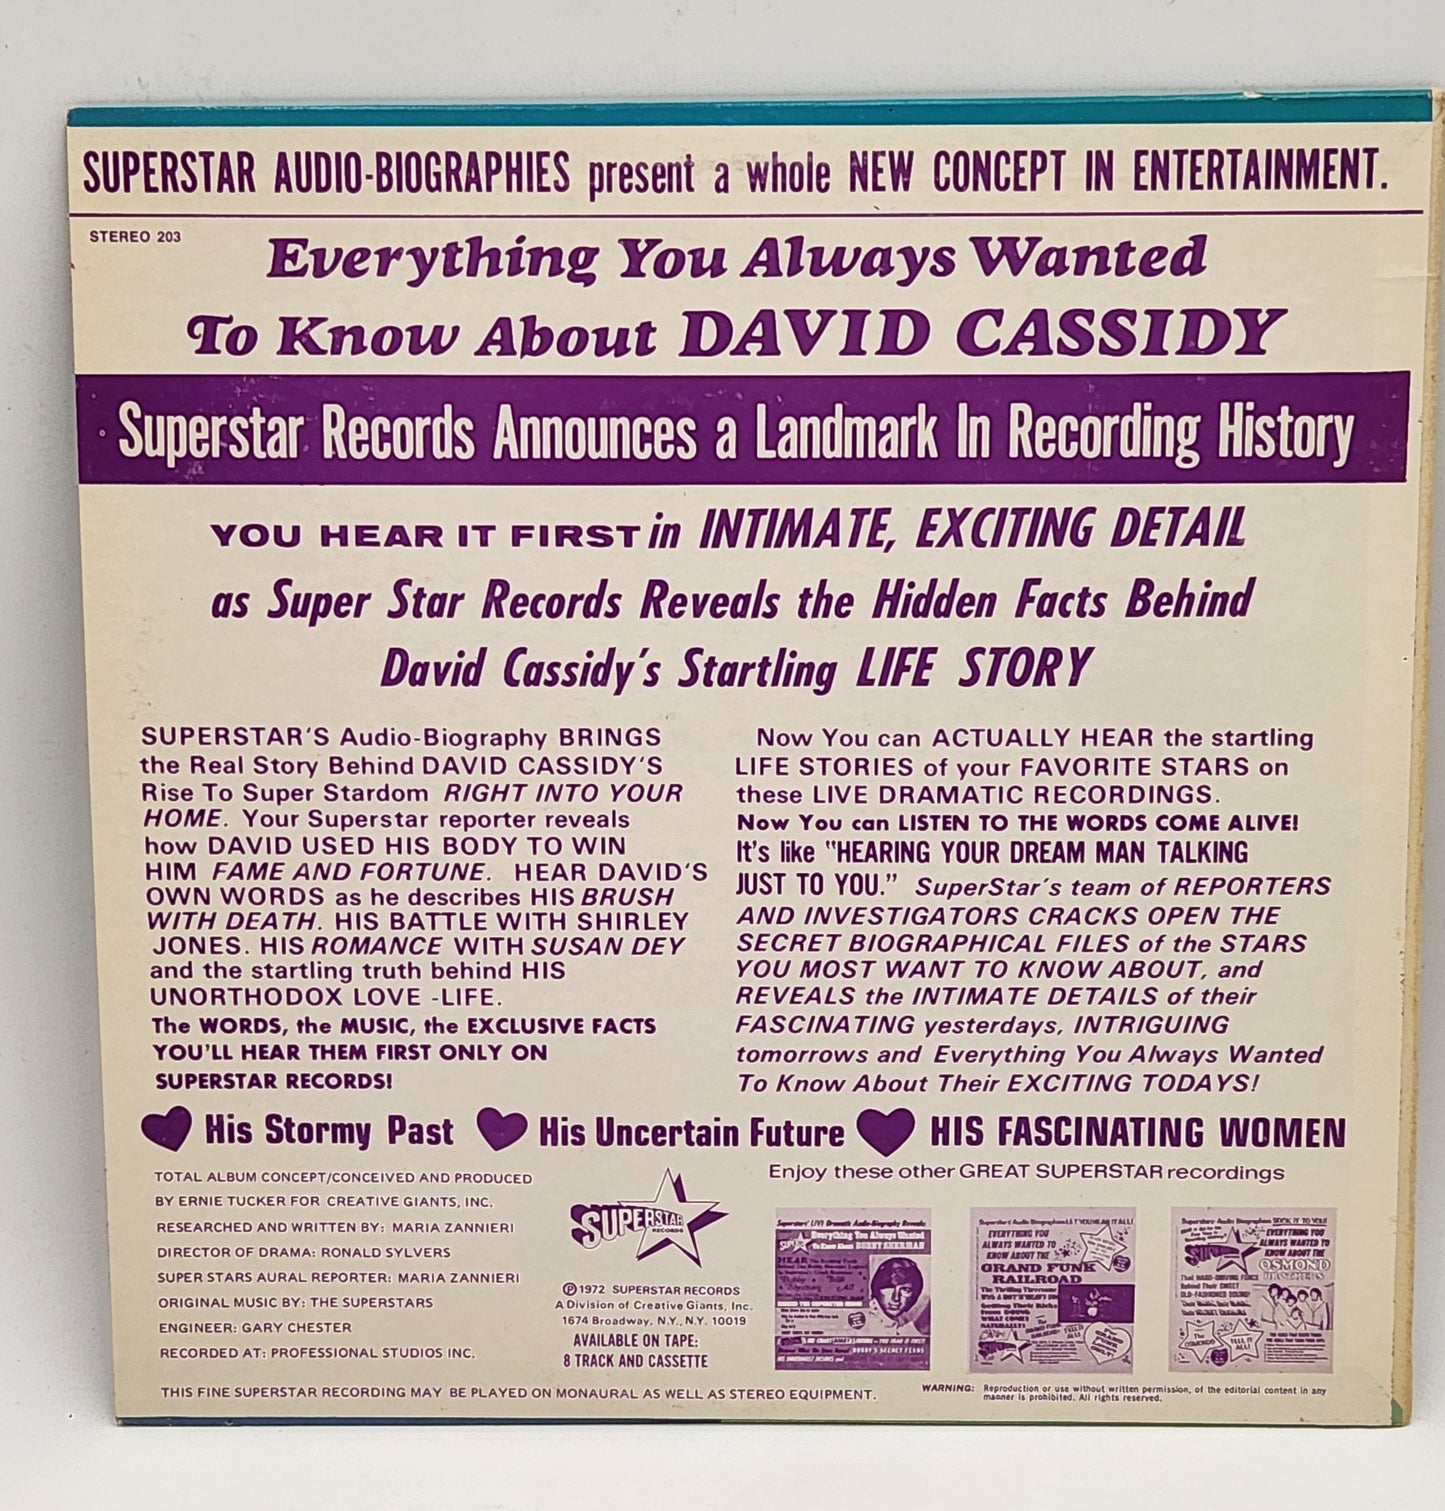 David Cassidy "Everything You Always Wanted To Know About" 1972 Biography Record Album